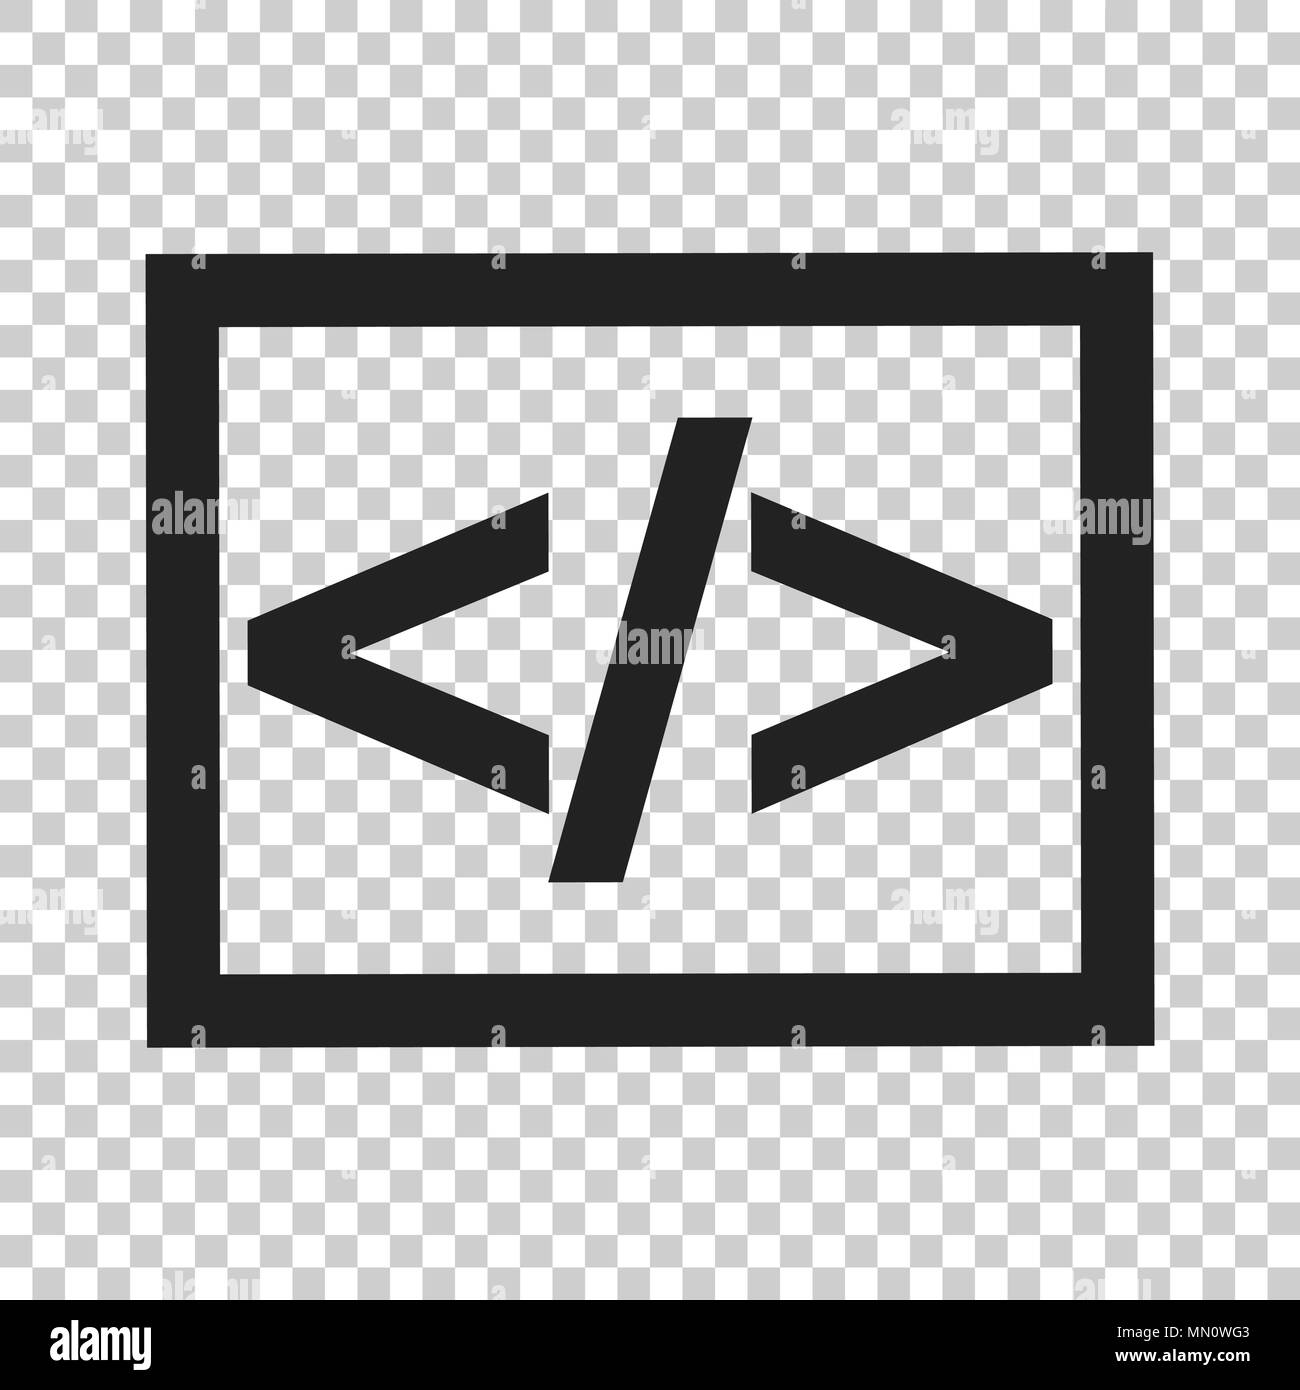 Open source business vector icon in flat style. Api programming illustration on isolated transparent background. Programmer technology concept. Stock Vector